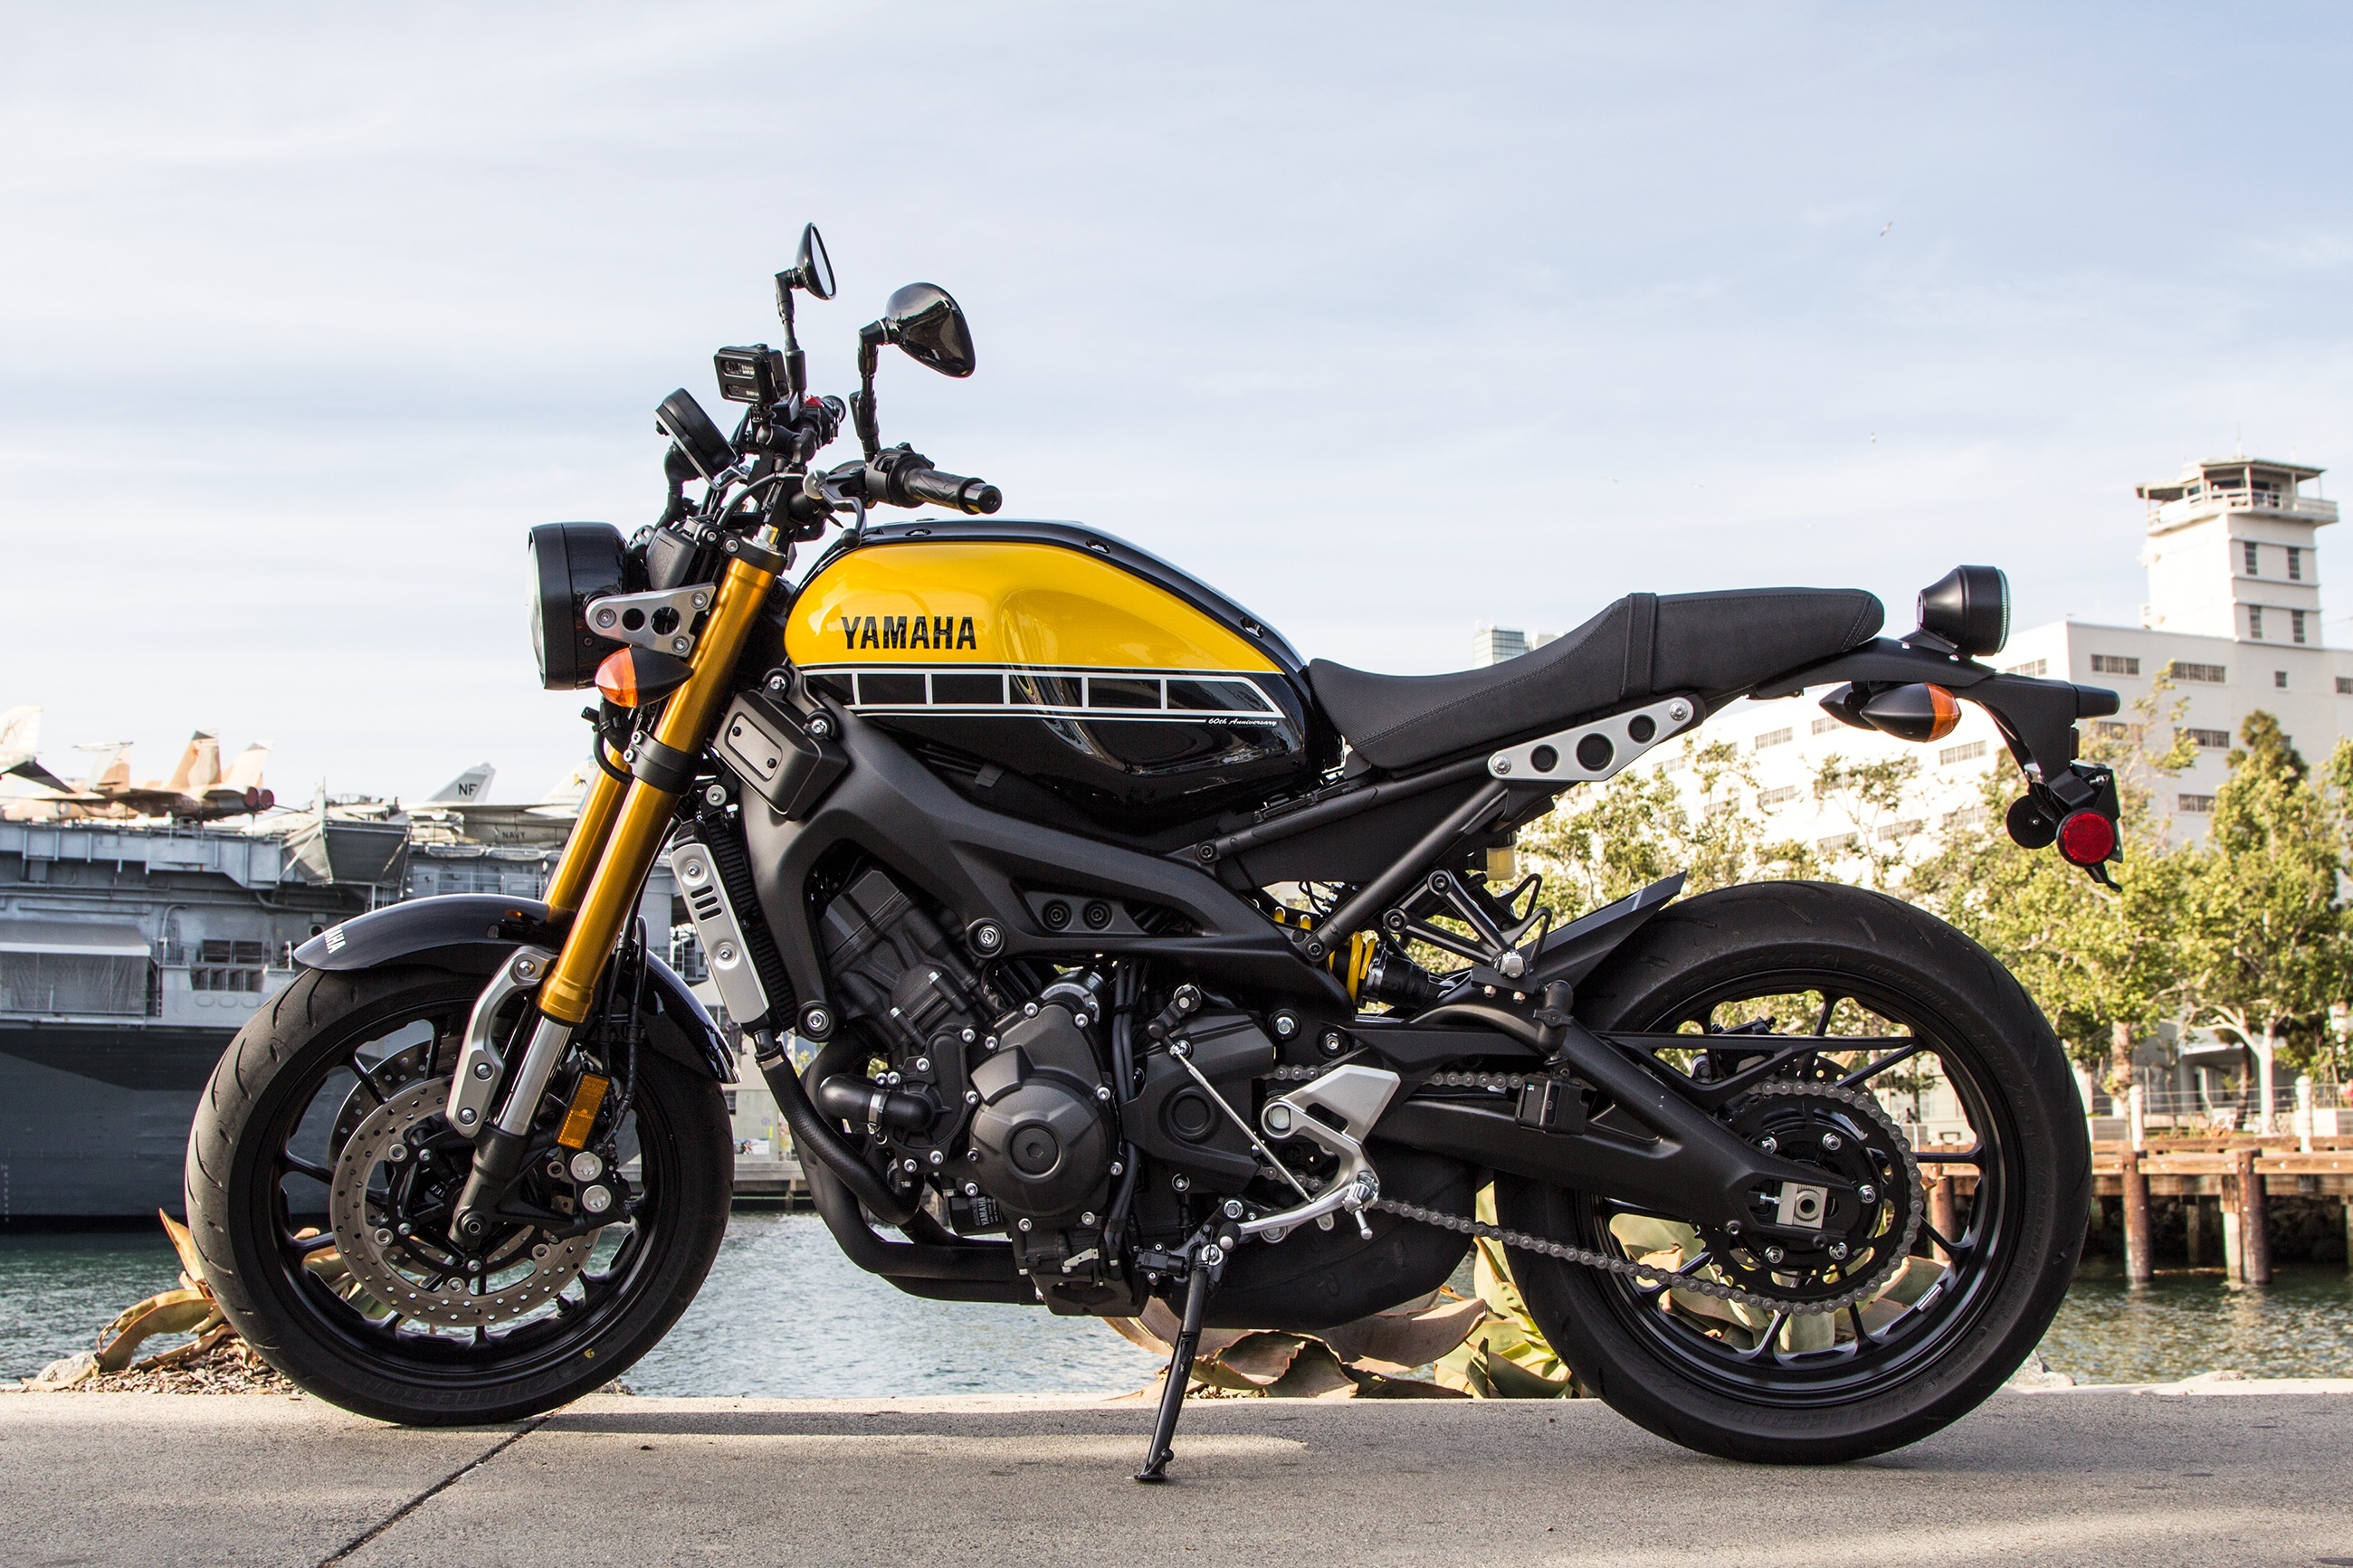 Yamaha XSR900, HD wallpapers and backgrounds, 2600x1740 HD Desktop